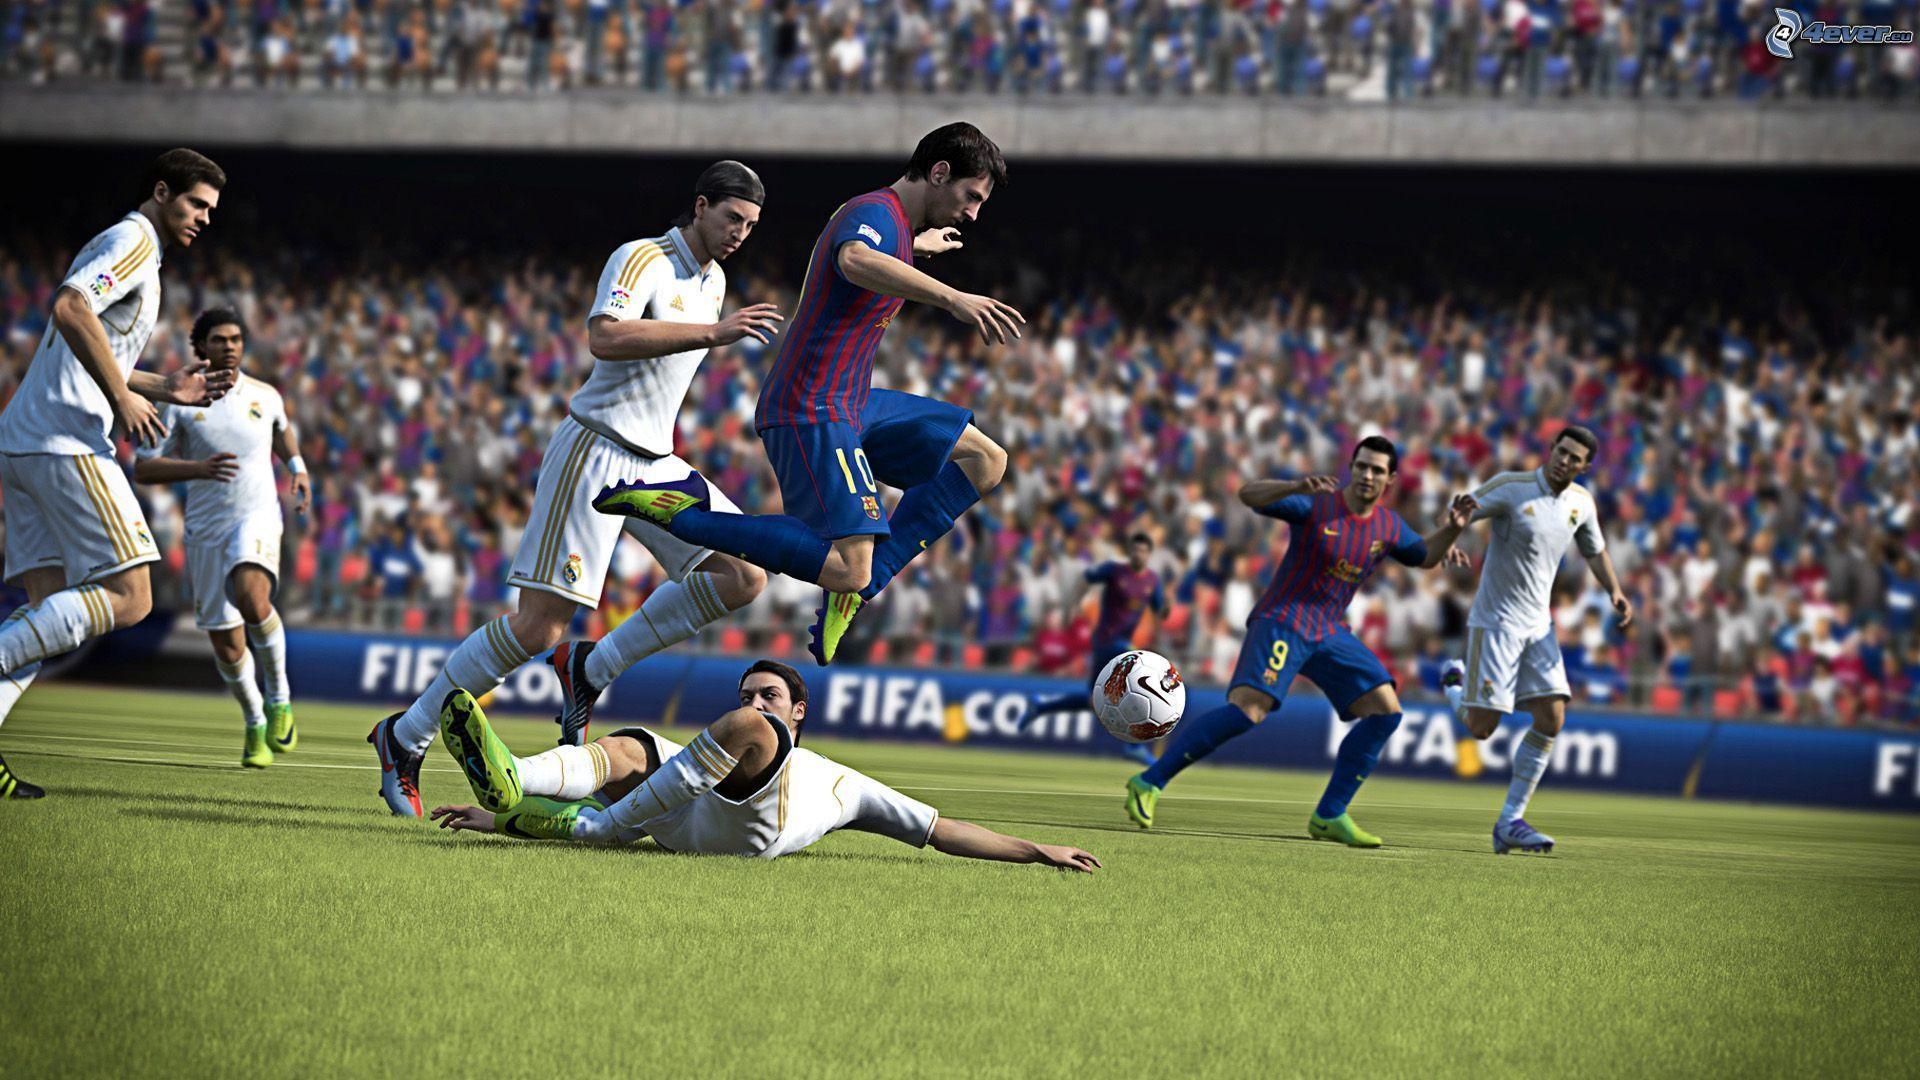 FIFA's President Reveals They're Developing a New Soccer Game